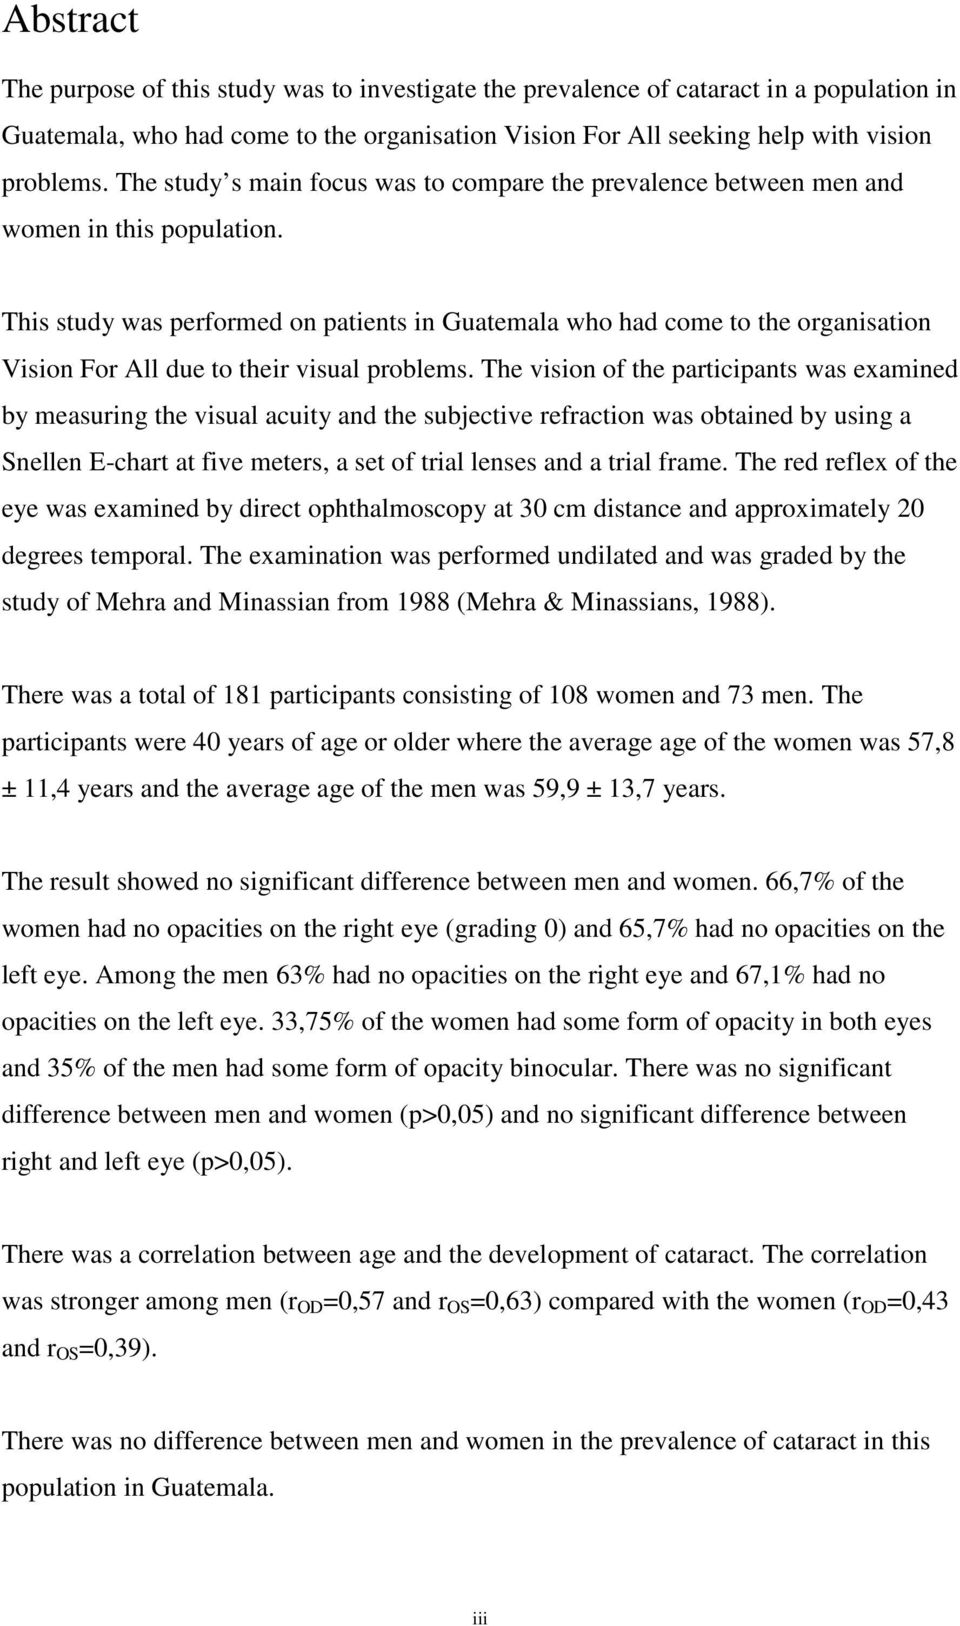 This study was performed on patients in Guatemala who had come to the organisation Vision For All due to their visual problems.